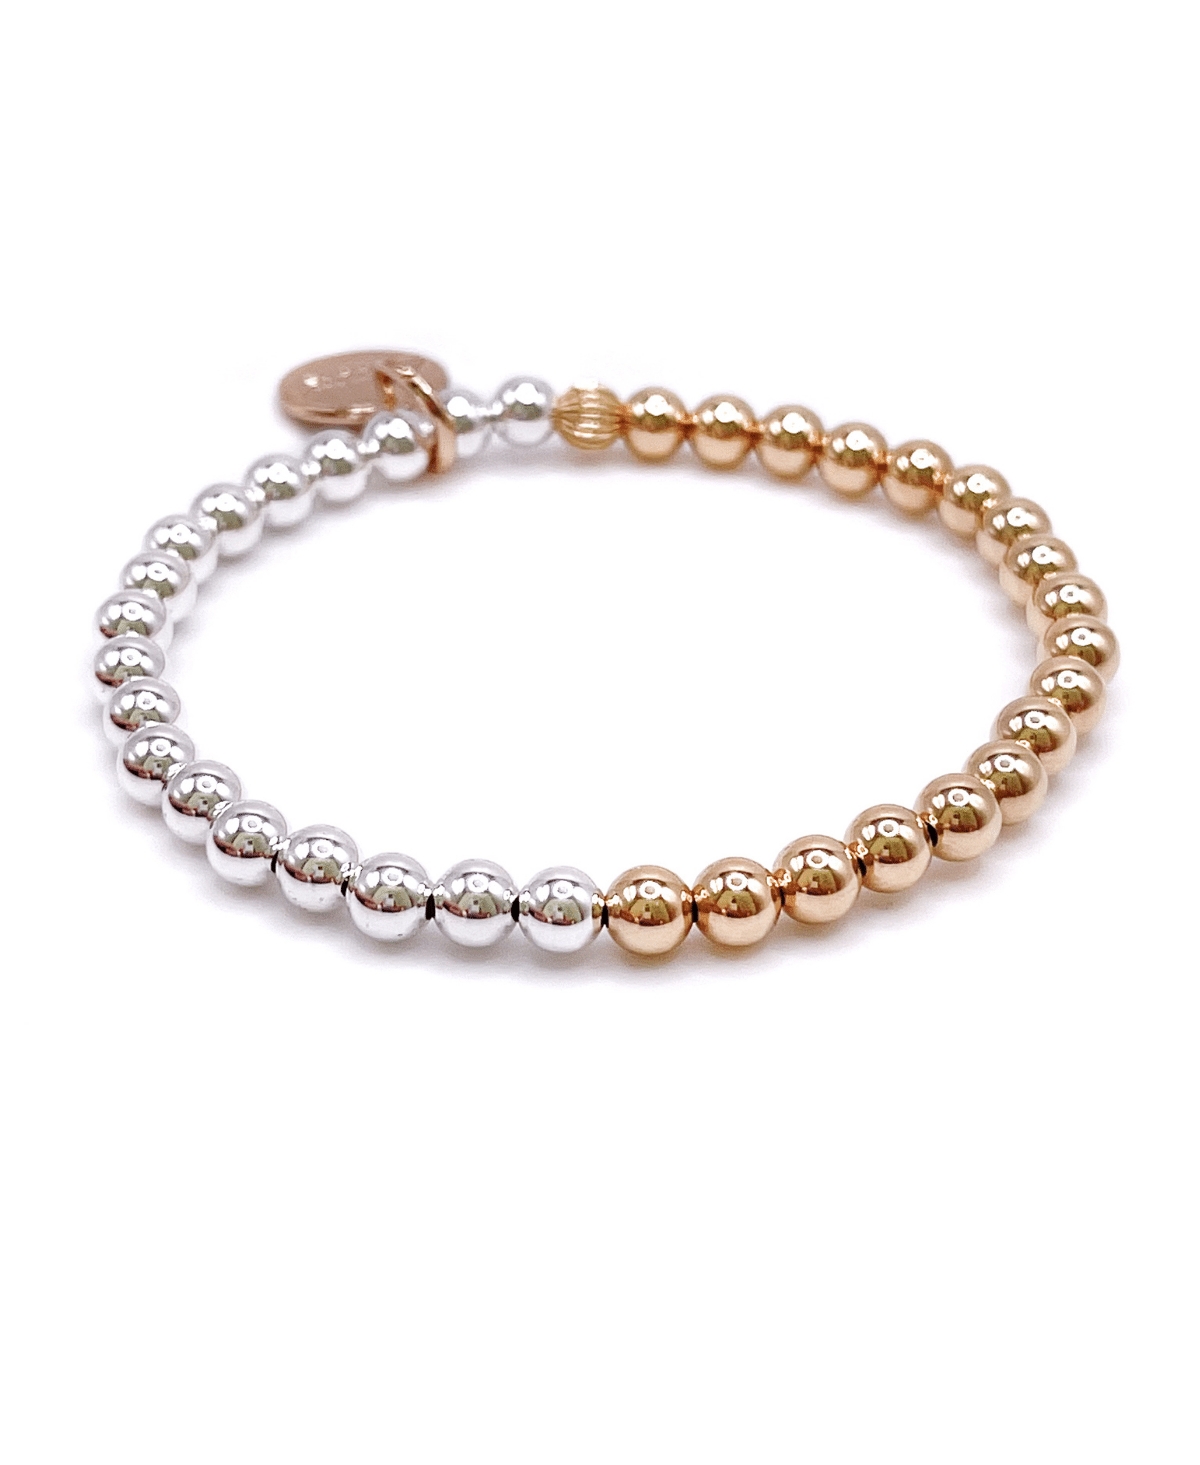 Non-Tarnishing Gold Filled, 5mm Gold Ball and Sterling Silver Bracelet - Gold  silver